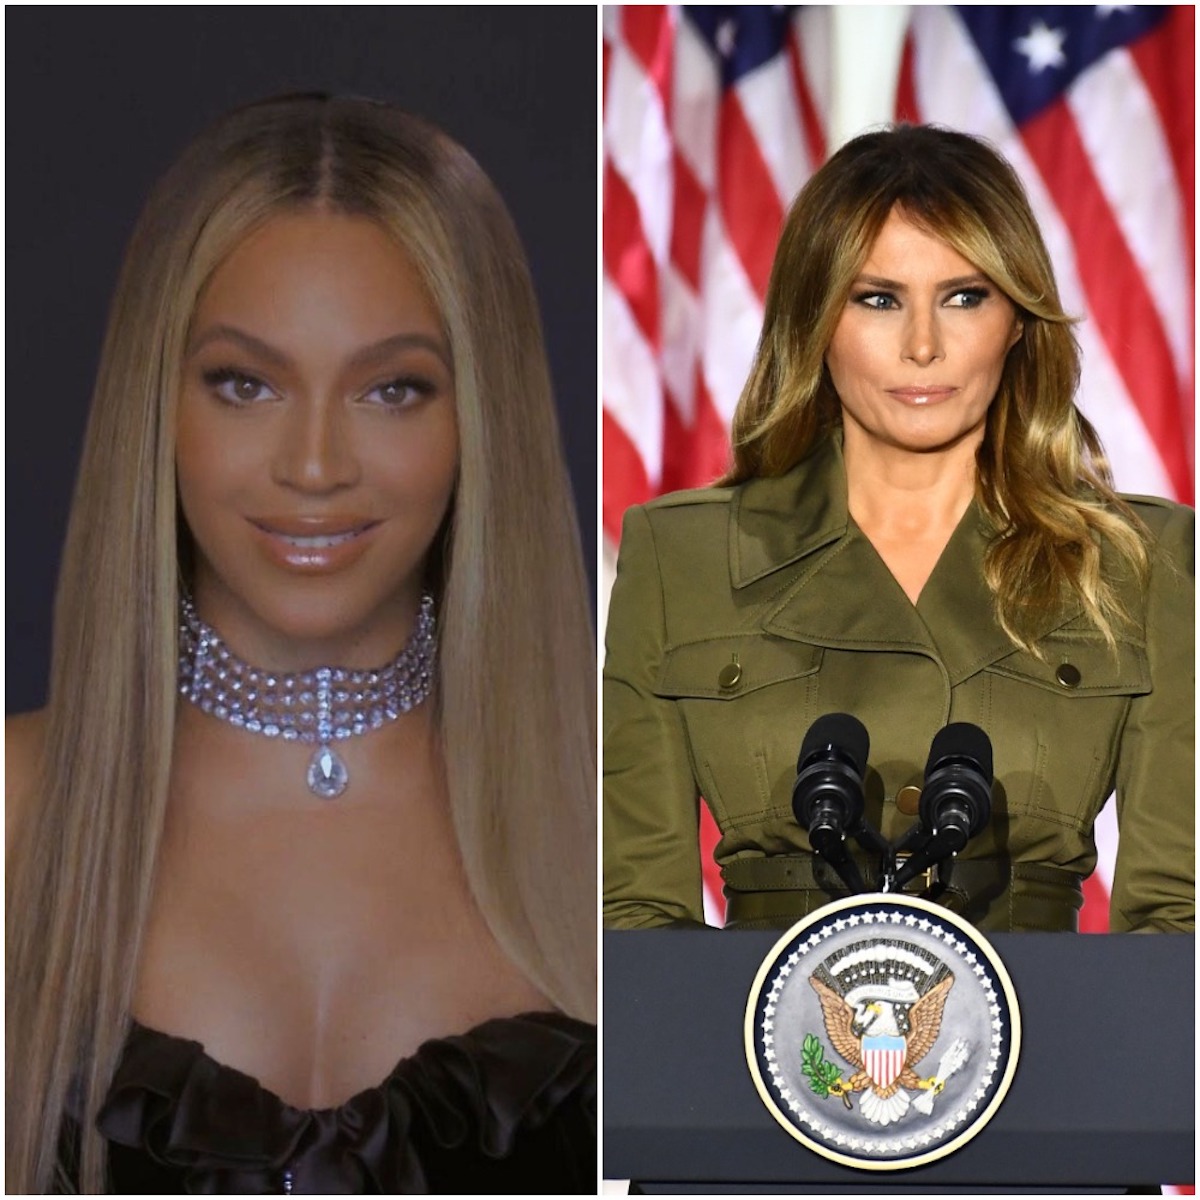 Melania Trump Was Shocked Beyoncé Was Featured on the Cover of Vogue, Leaked Audio Reveals